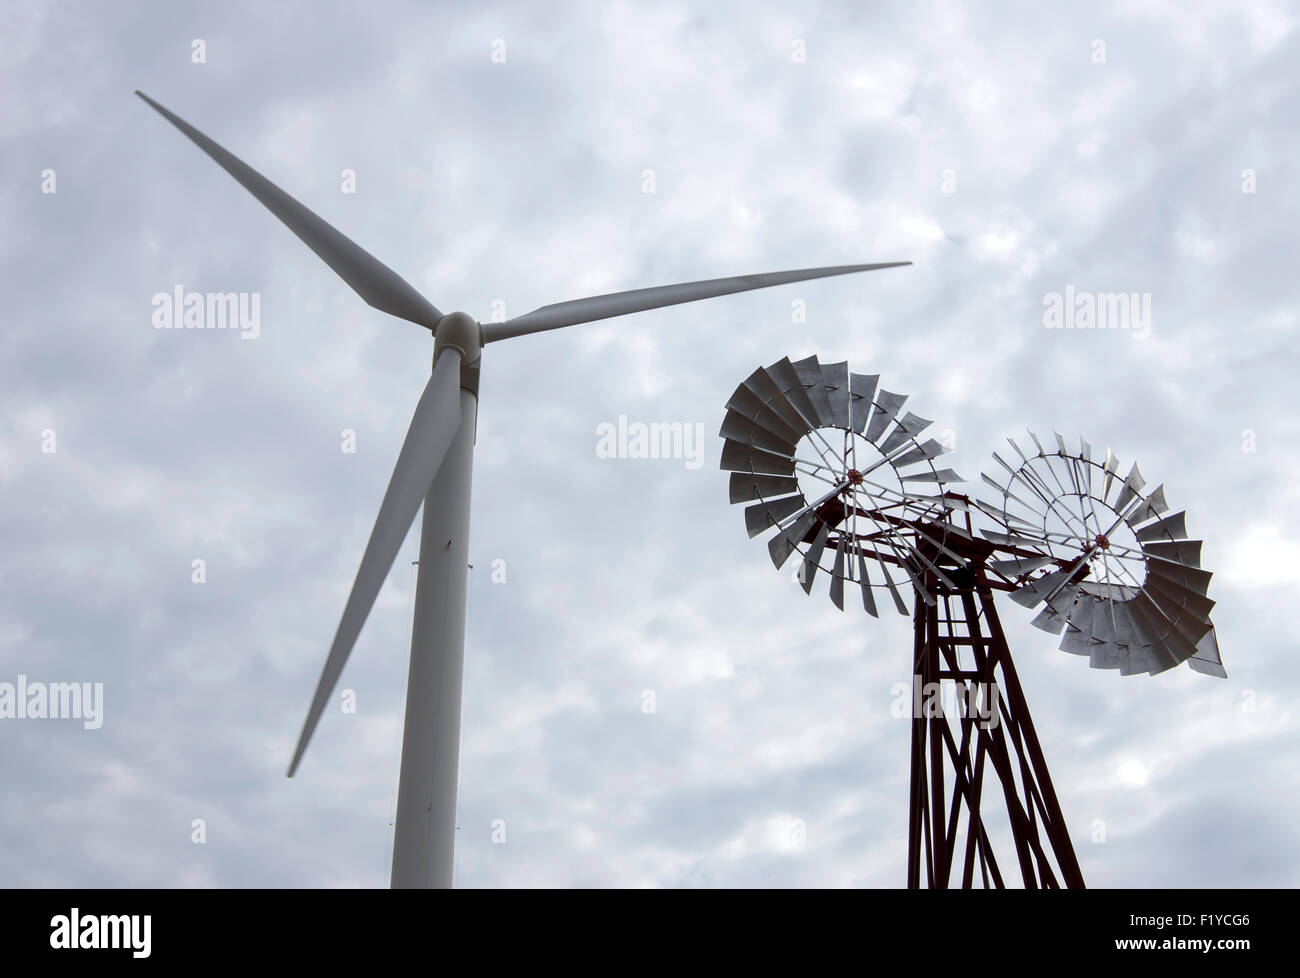 Windmills on display at the American Wind Power Center and Museum in Lubbock, Texas. Stock Photo